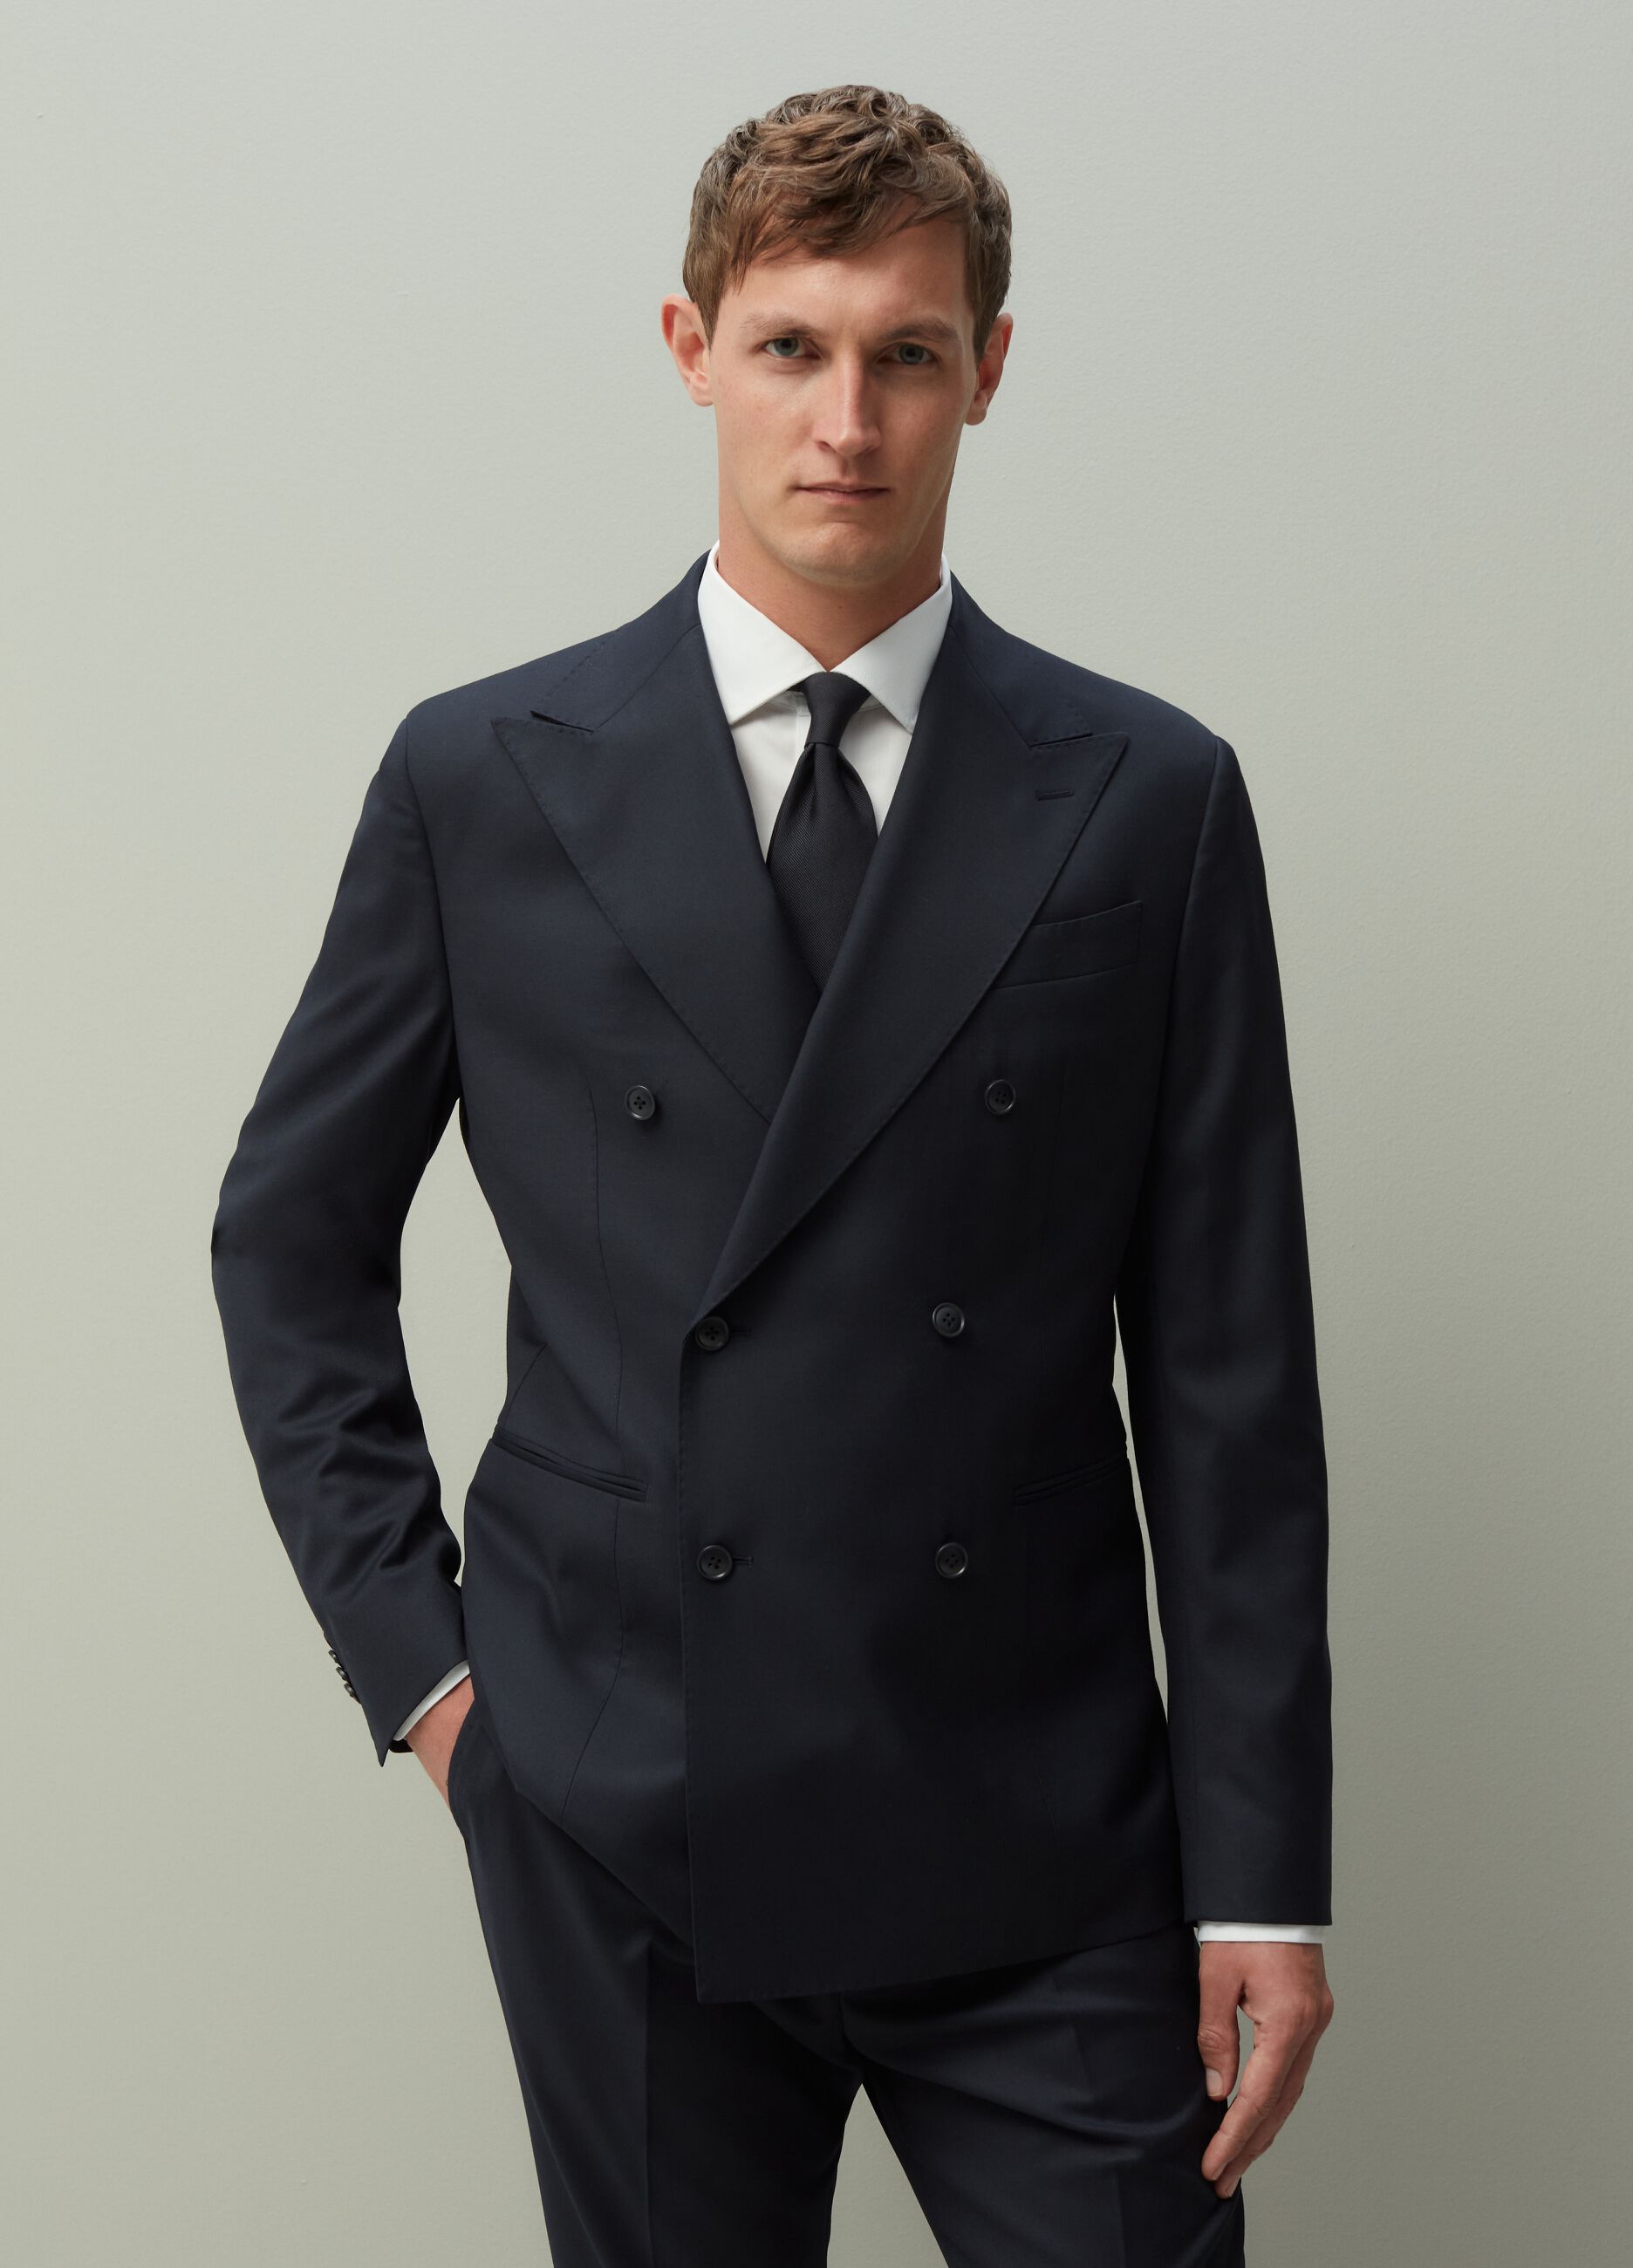 Double-breasted formal blazer in navy blue